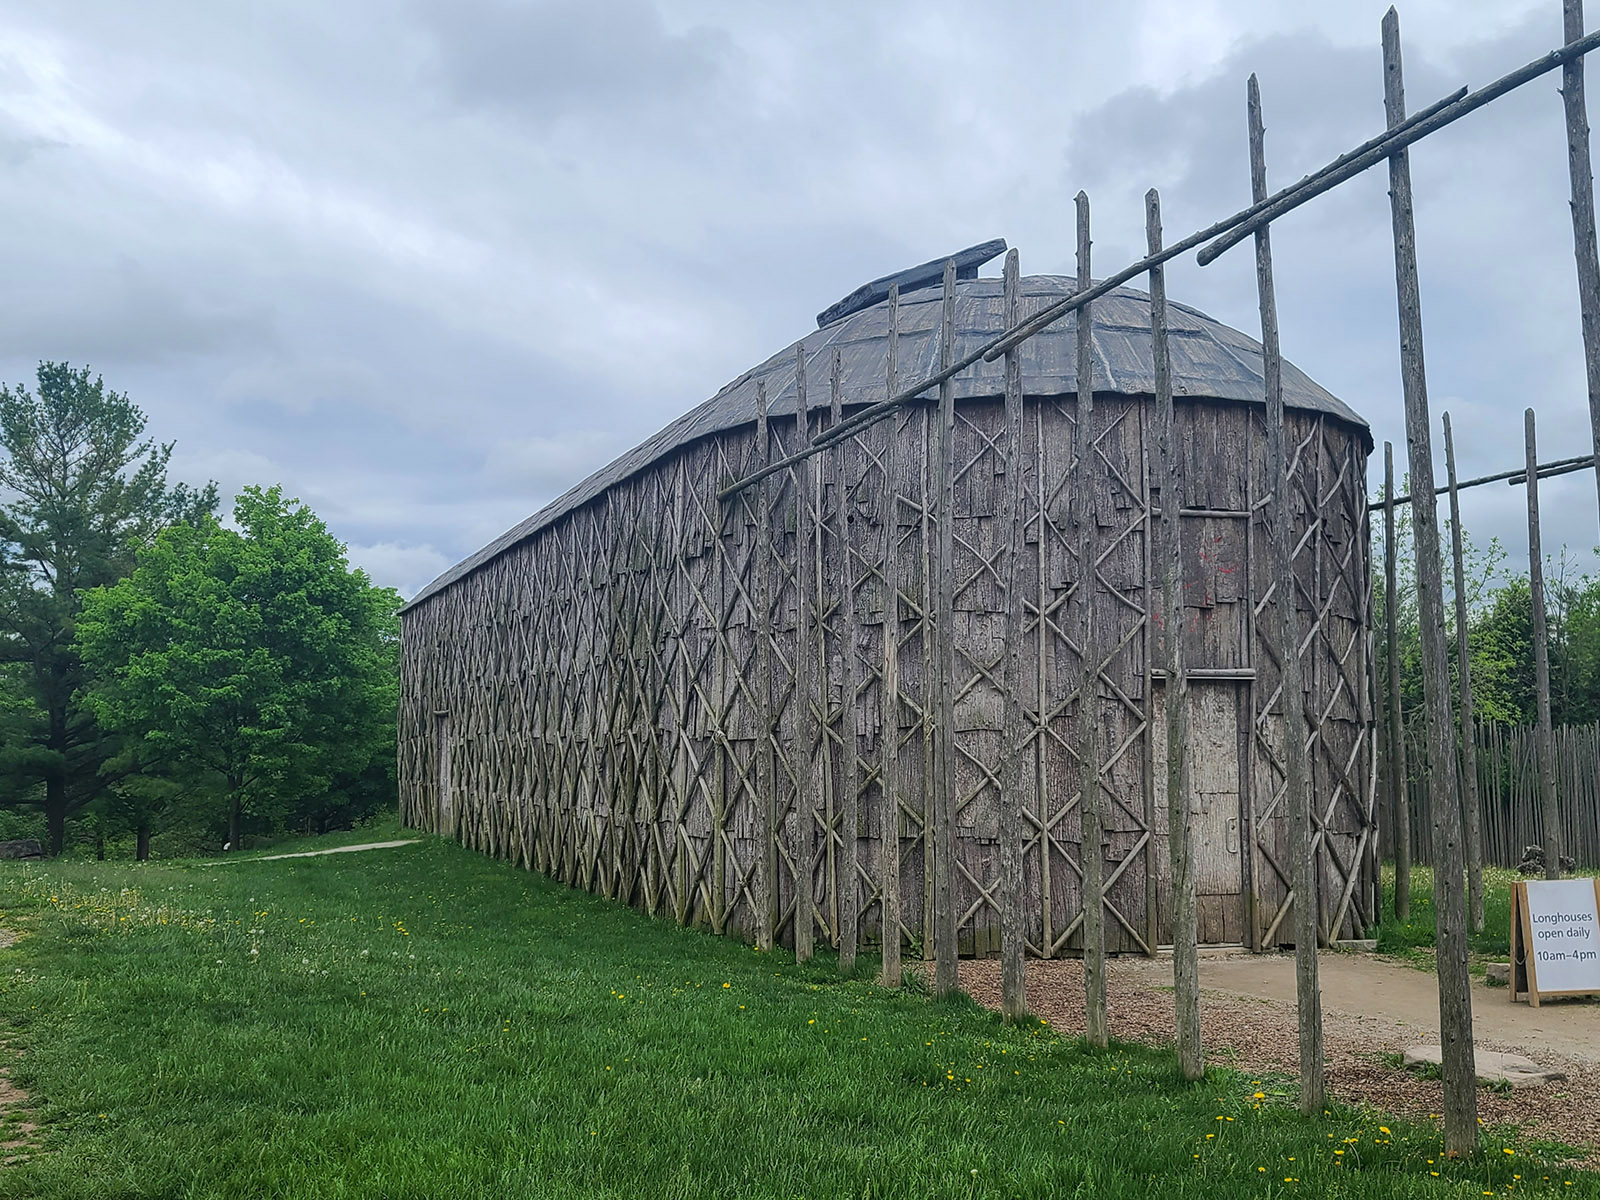 A wooden recreation of an Iroquois longhouse.